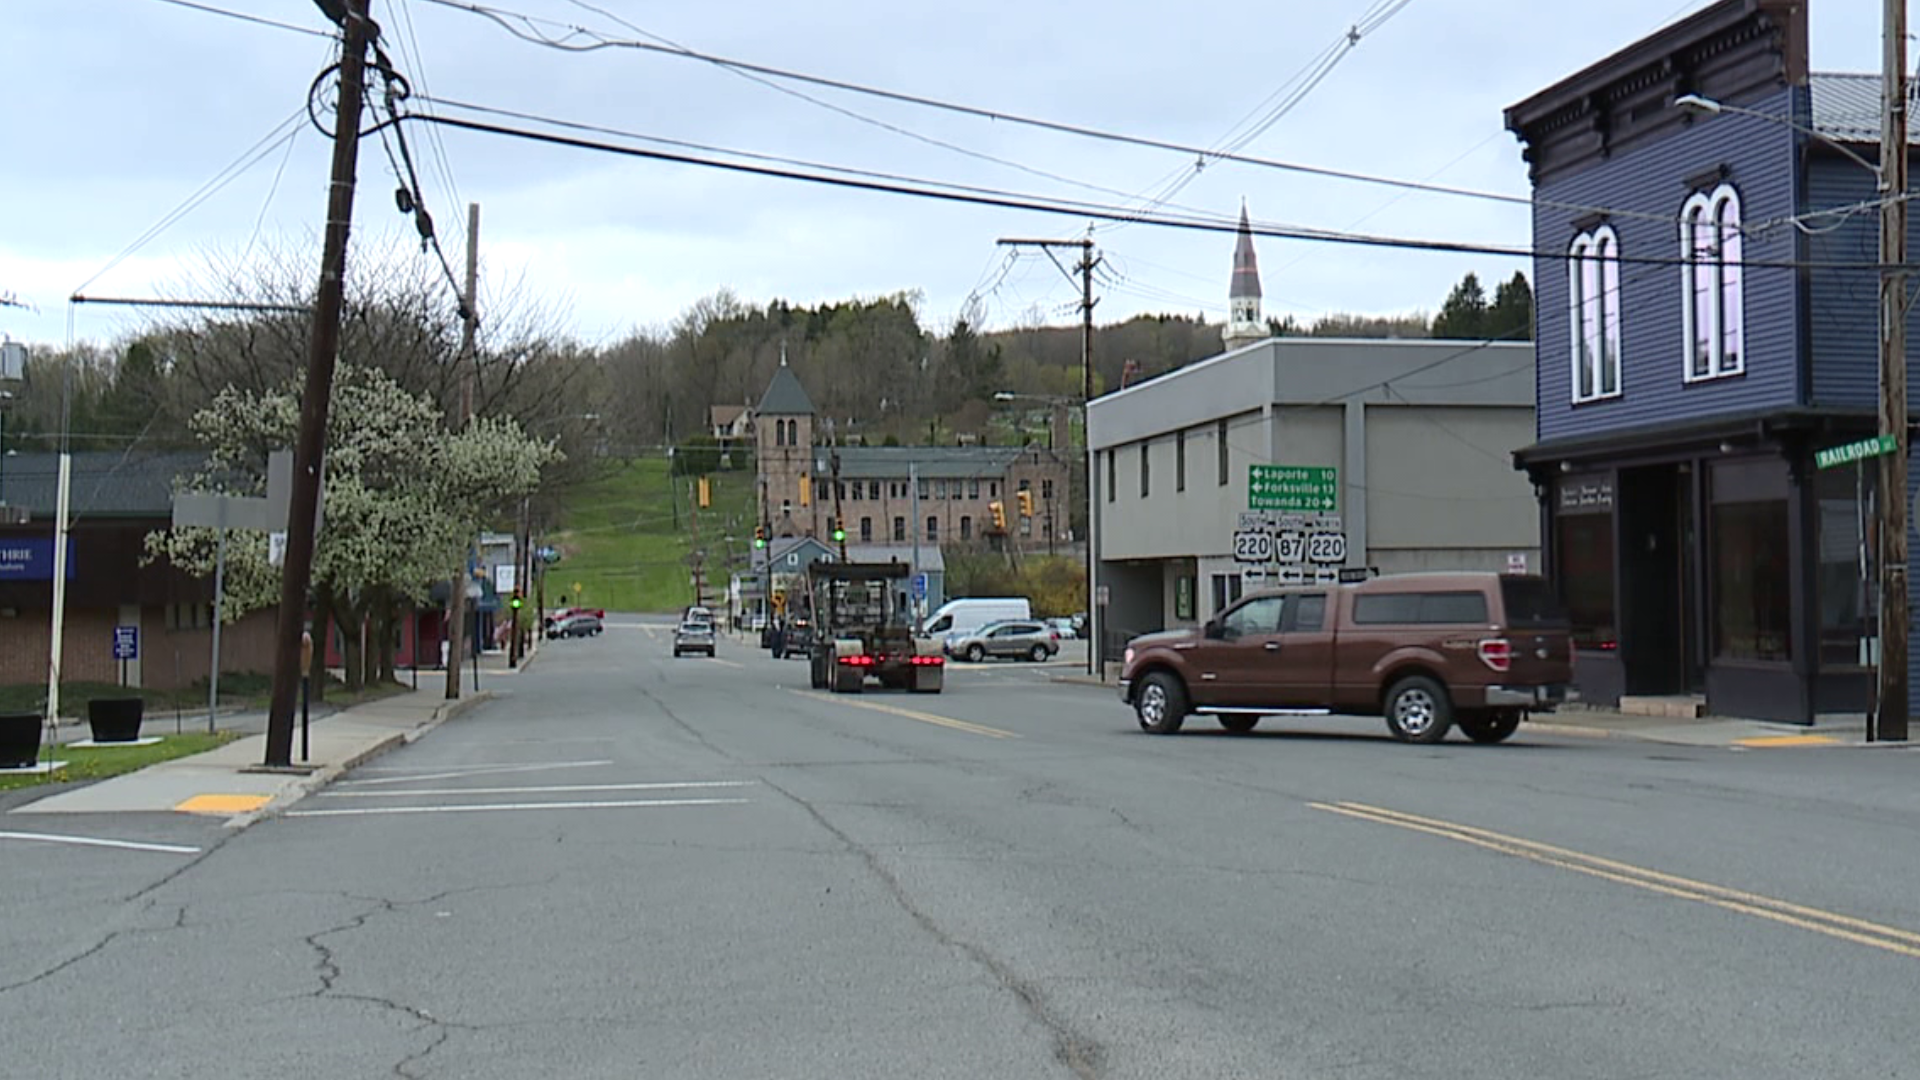 There's excitement in the air in one rural community, after the governor announced it's on the list of counties that can begin the reopening process.